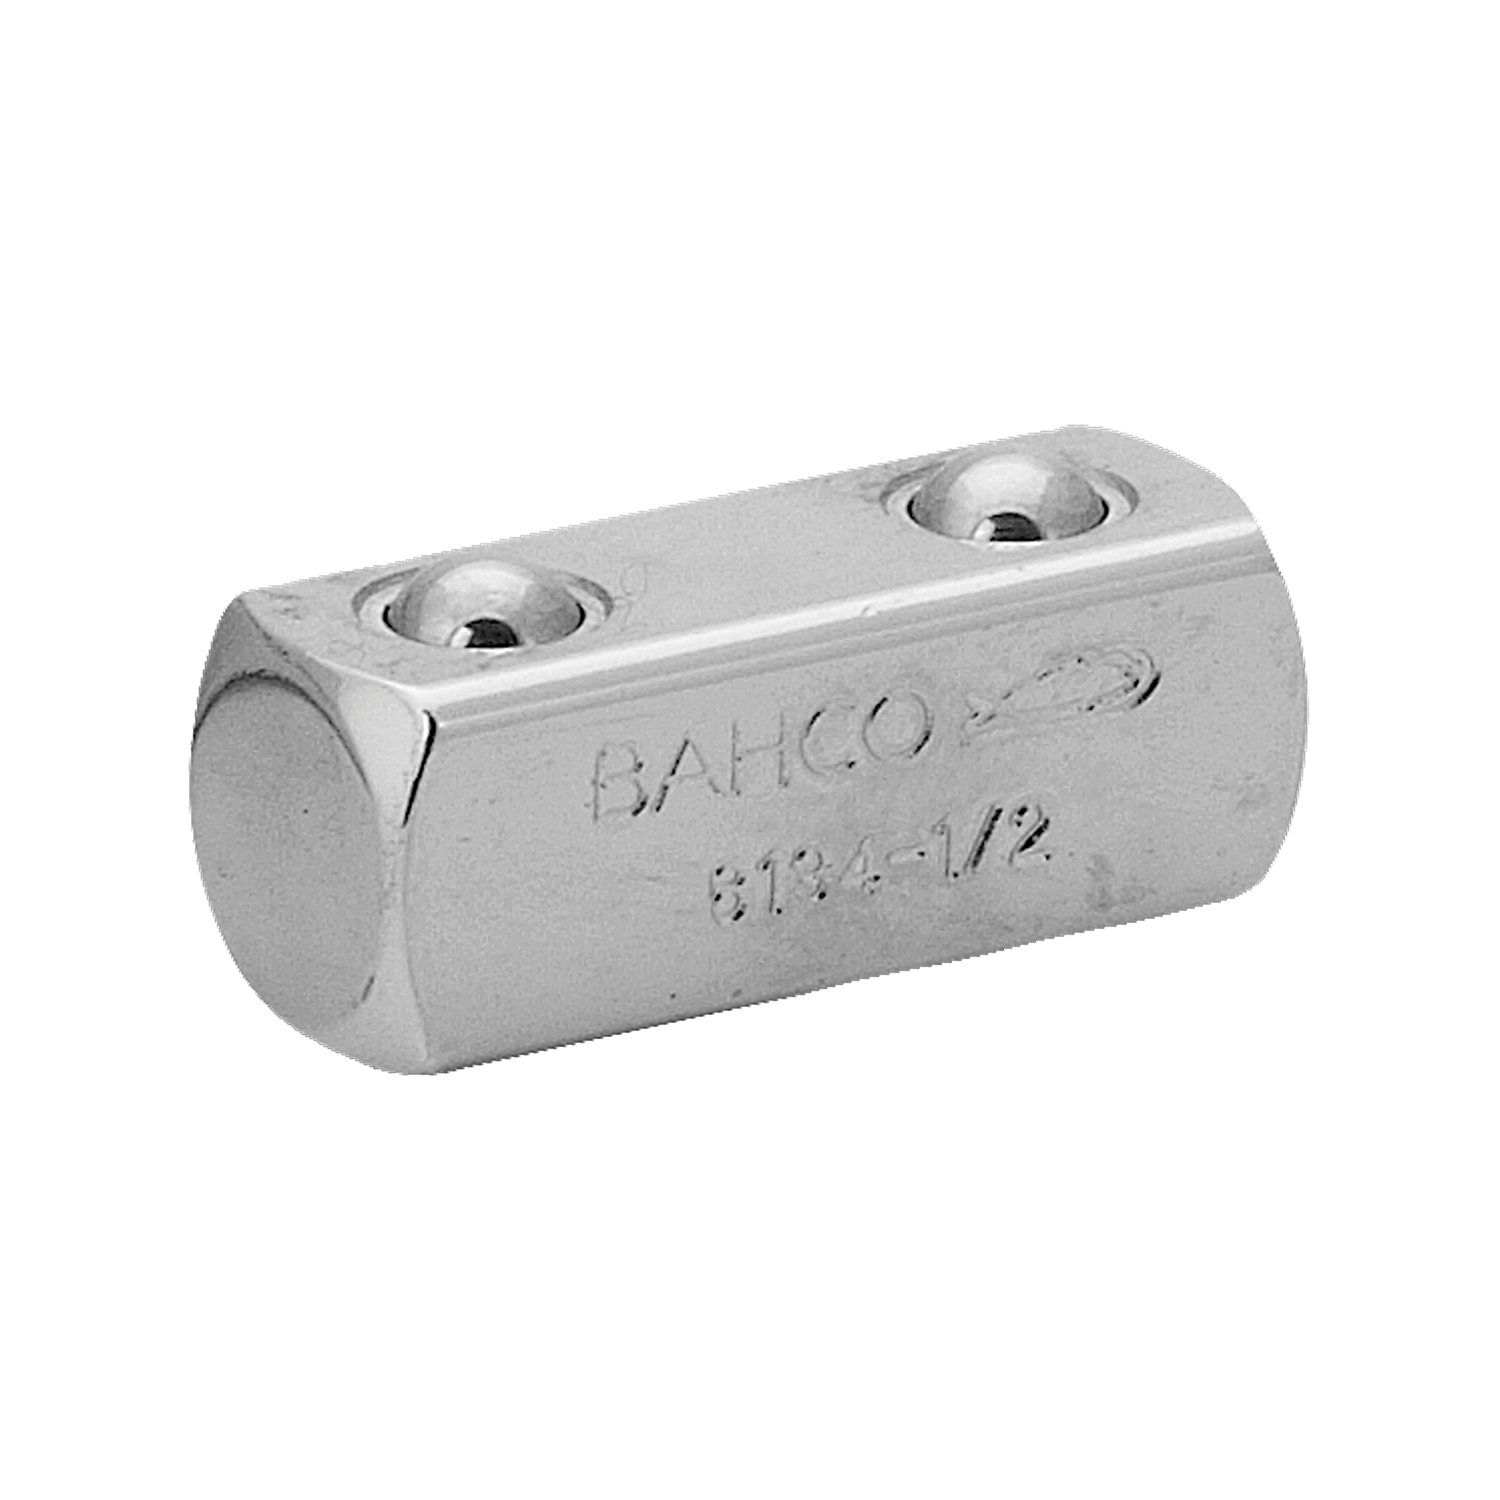 BAHCO 8194-1/2 Fitting Square Drive For 8193-1/2 1/2" Ratchet - Premium 1/2" Fitting Spare Ratchet from BAHCO - Shop now at Yew Aik.